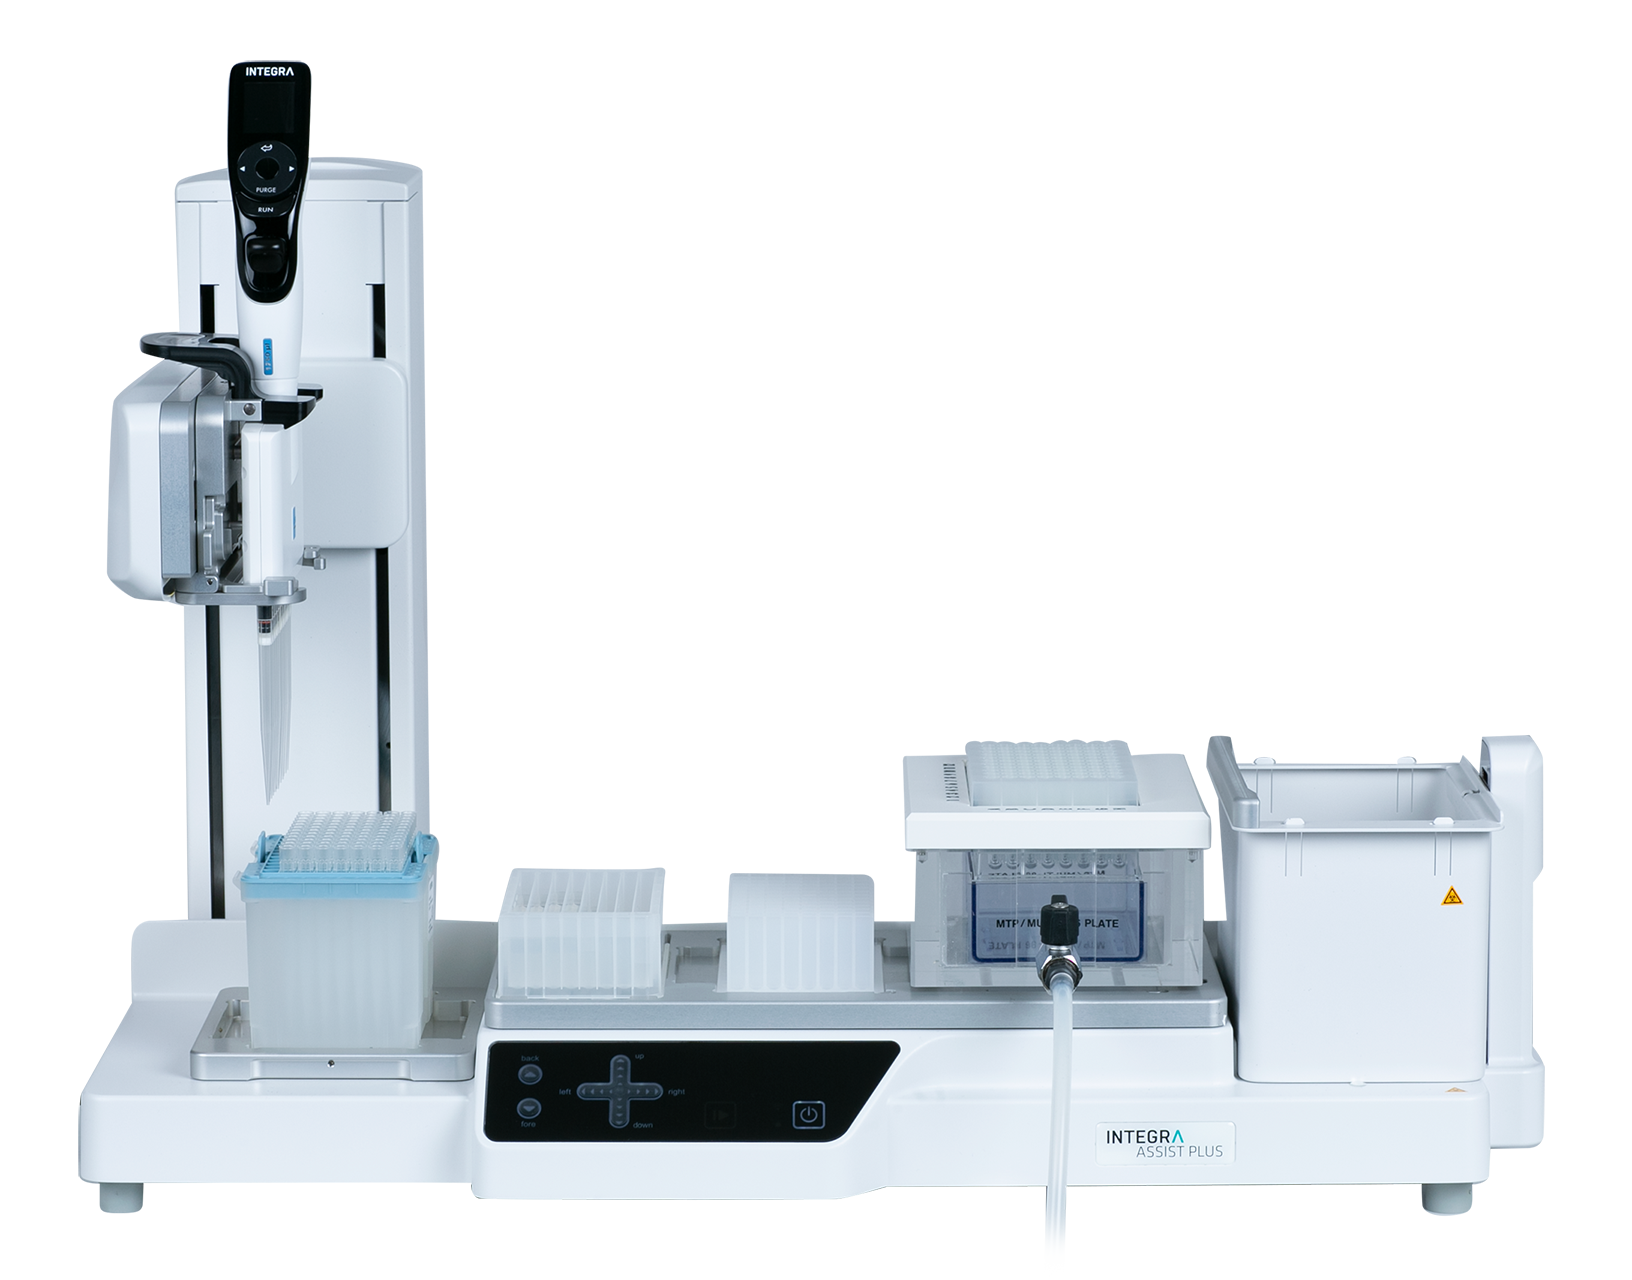 ASSIST PLUS pipetting robot with an 8 row reagent reservoir, a culture plate and MACHEREY-NAGEL's NucleoVac 96 Vacuum Manifold.